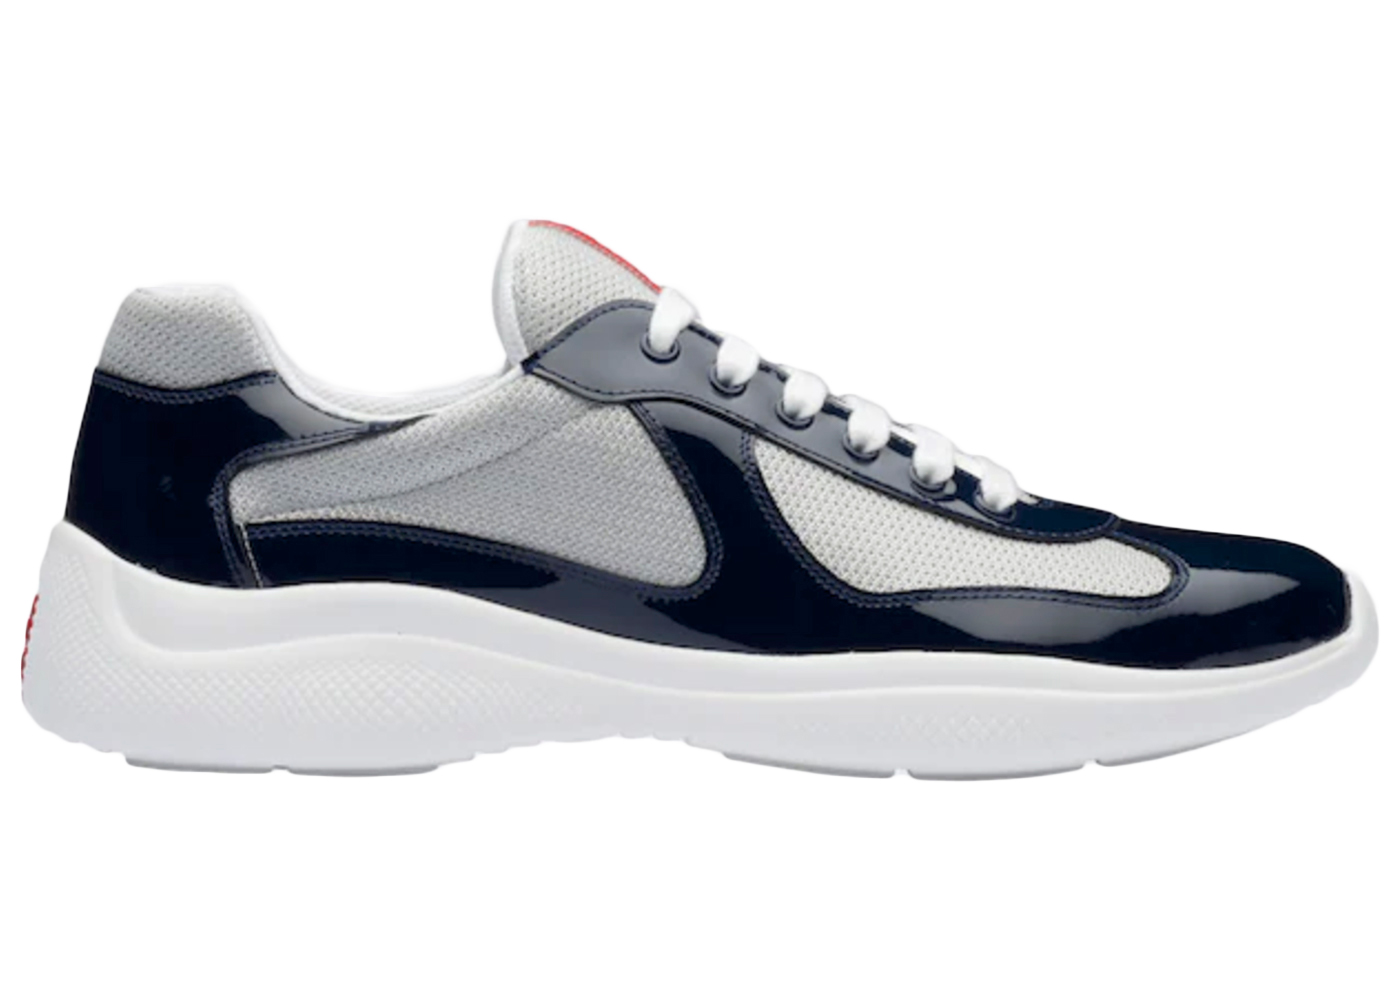 Buy Prada Shoes and Sneakers - StockX